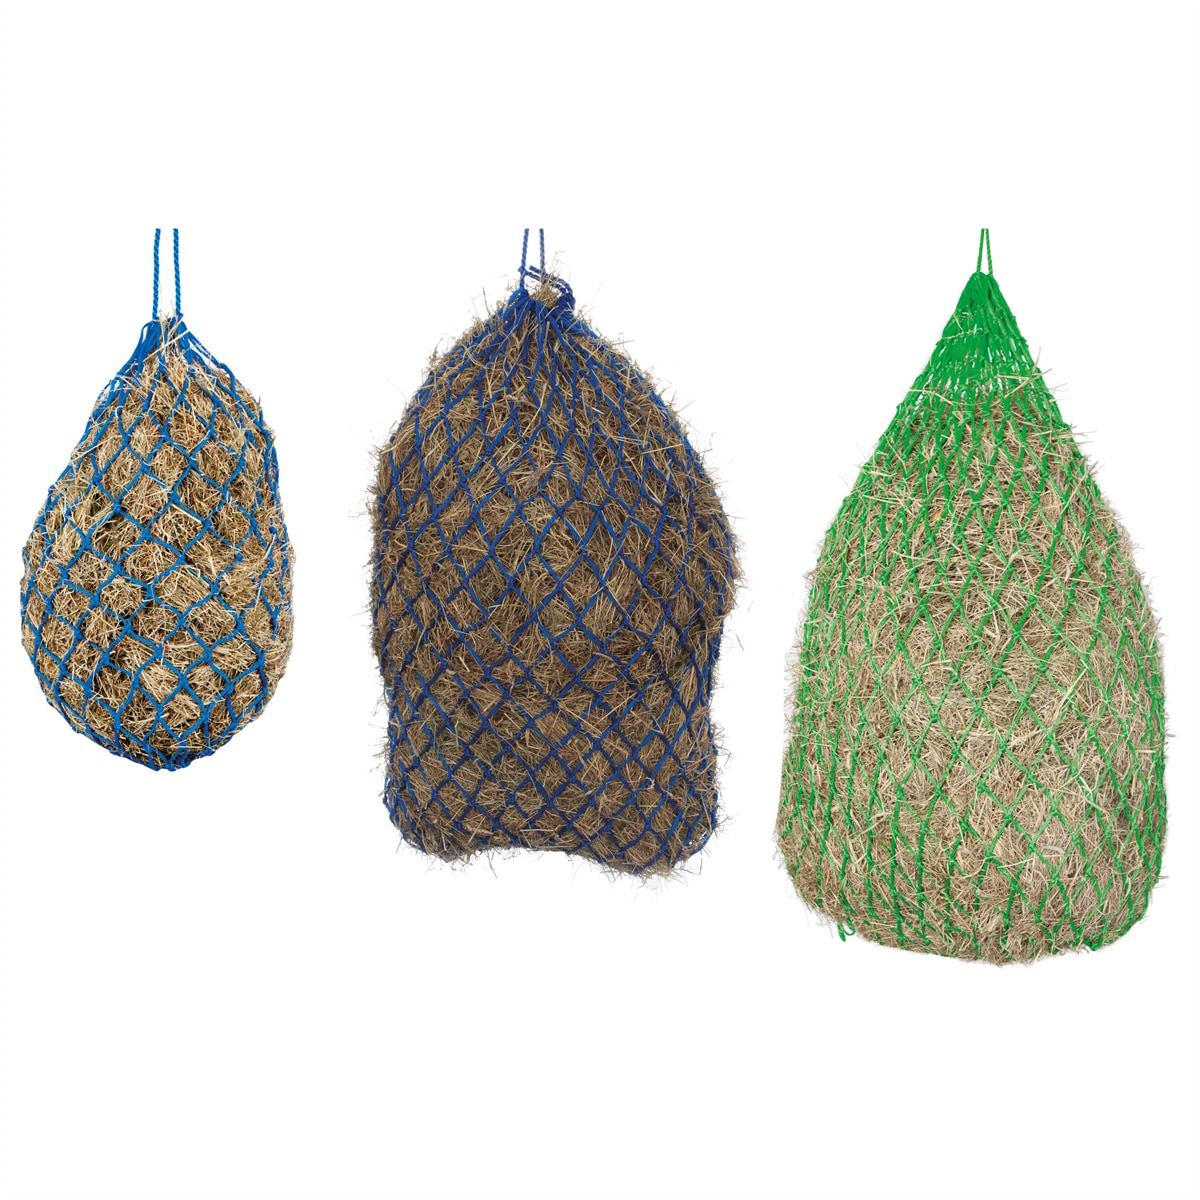 2 x LARGE STRONG HAY HAYLAGE NETS SMALL HOLES HOLDS APPROX 10 KG 